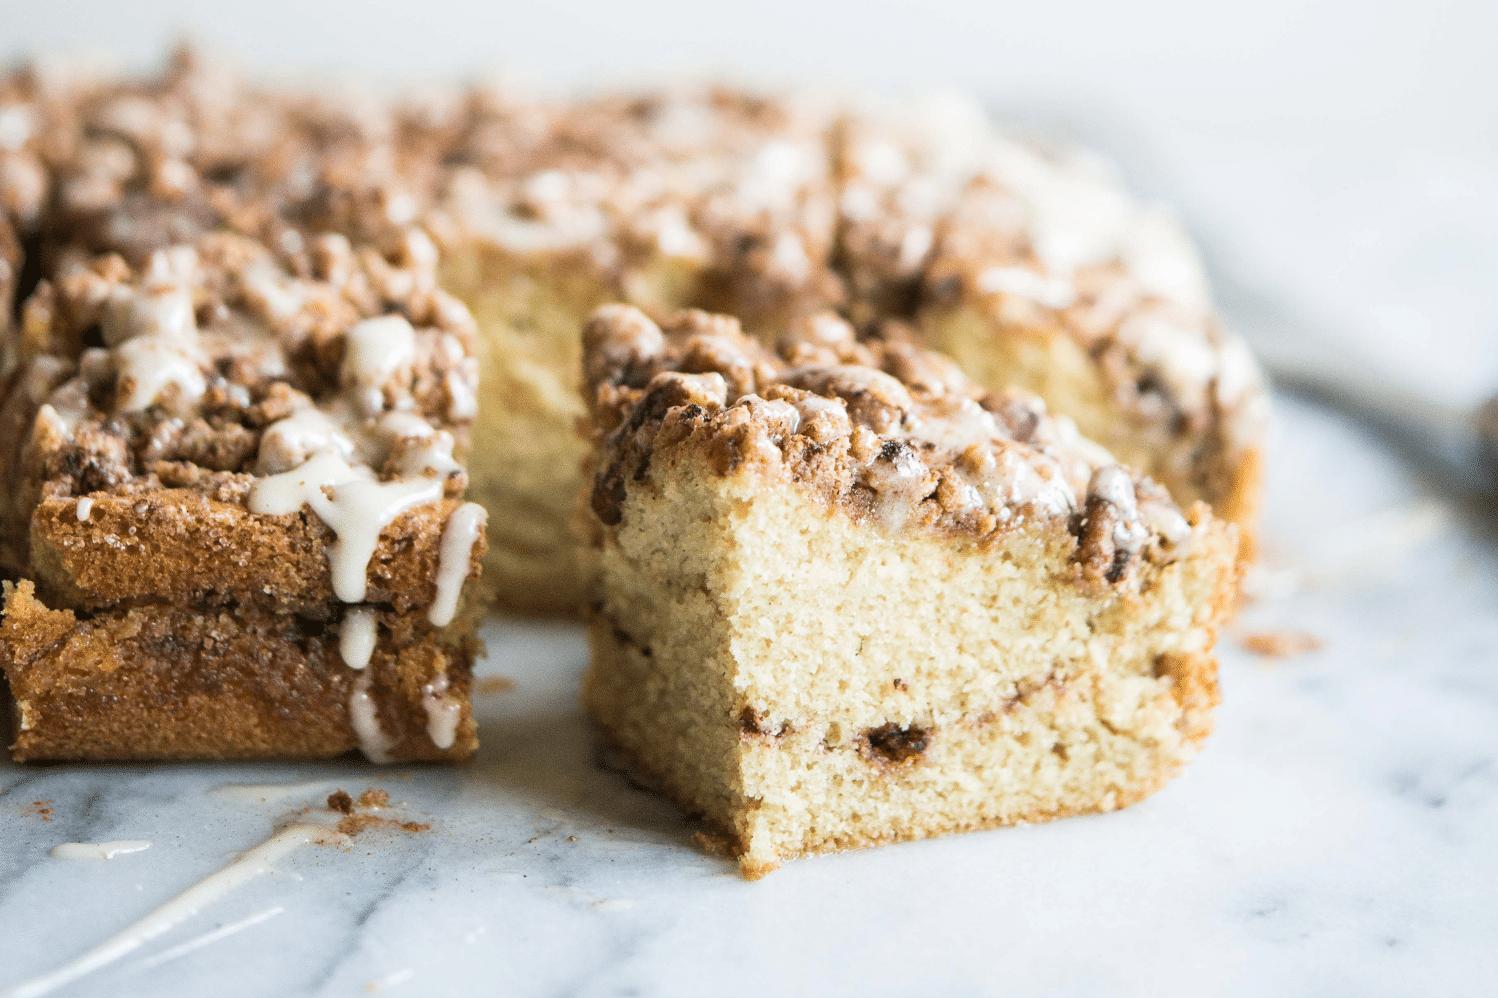  Whether for brunch or dessert, this coffee cake is always a hit.